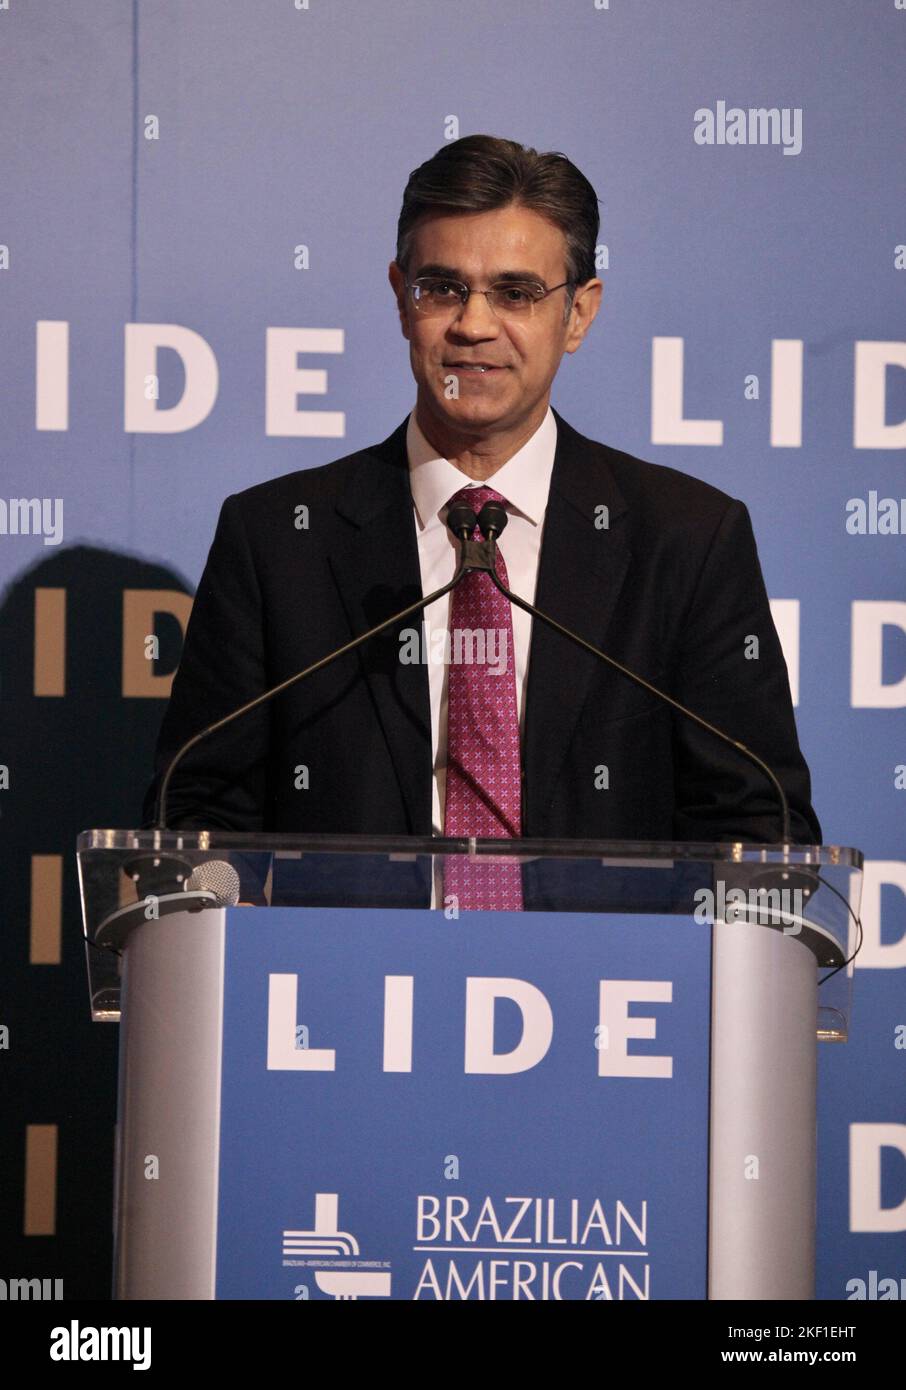 New York, USA. 15th Nov, 2022. (NEW) The LIDE Brazil Conference-NY : ''The Brazilian Economy in 2023 and Beyond.'' November 15, 2022, New York, USA: The LIDE Brazil Conference - New York : ''The Brazilian Economy in 2023 and Beyond '' is taking place on November 15th at the Harvard Club in New York with the presence Roberto Campos Neto (president of the Central Bank), Henrique Meirelles (former Finance Minister and president of the Central Bank), Isaac Sidney (president of Brazilian Federation of Banks), Joaquim Levy (director of Banco Safra and former Finance Minister), Persio Arida (forme Stock Photo